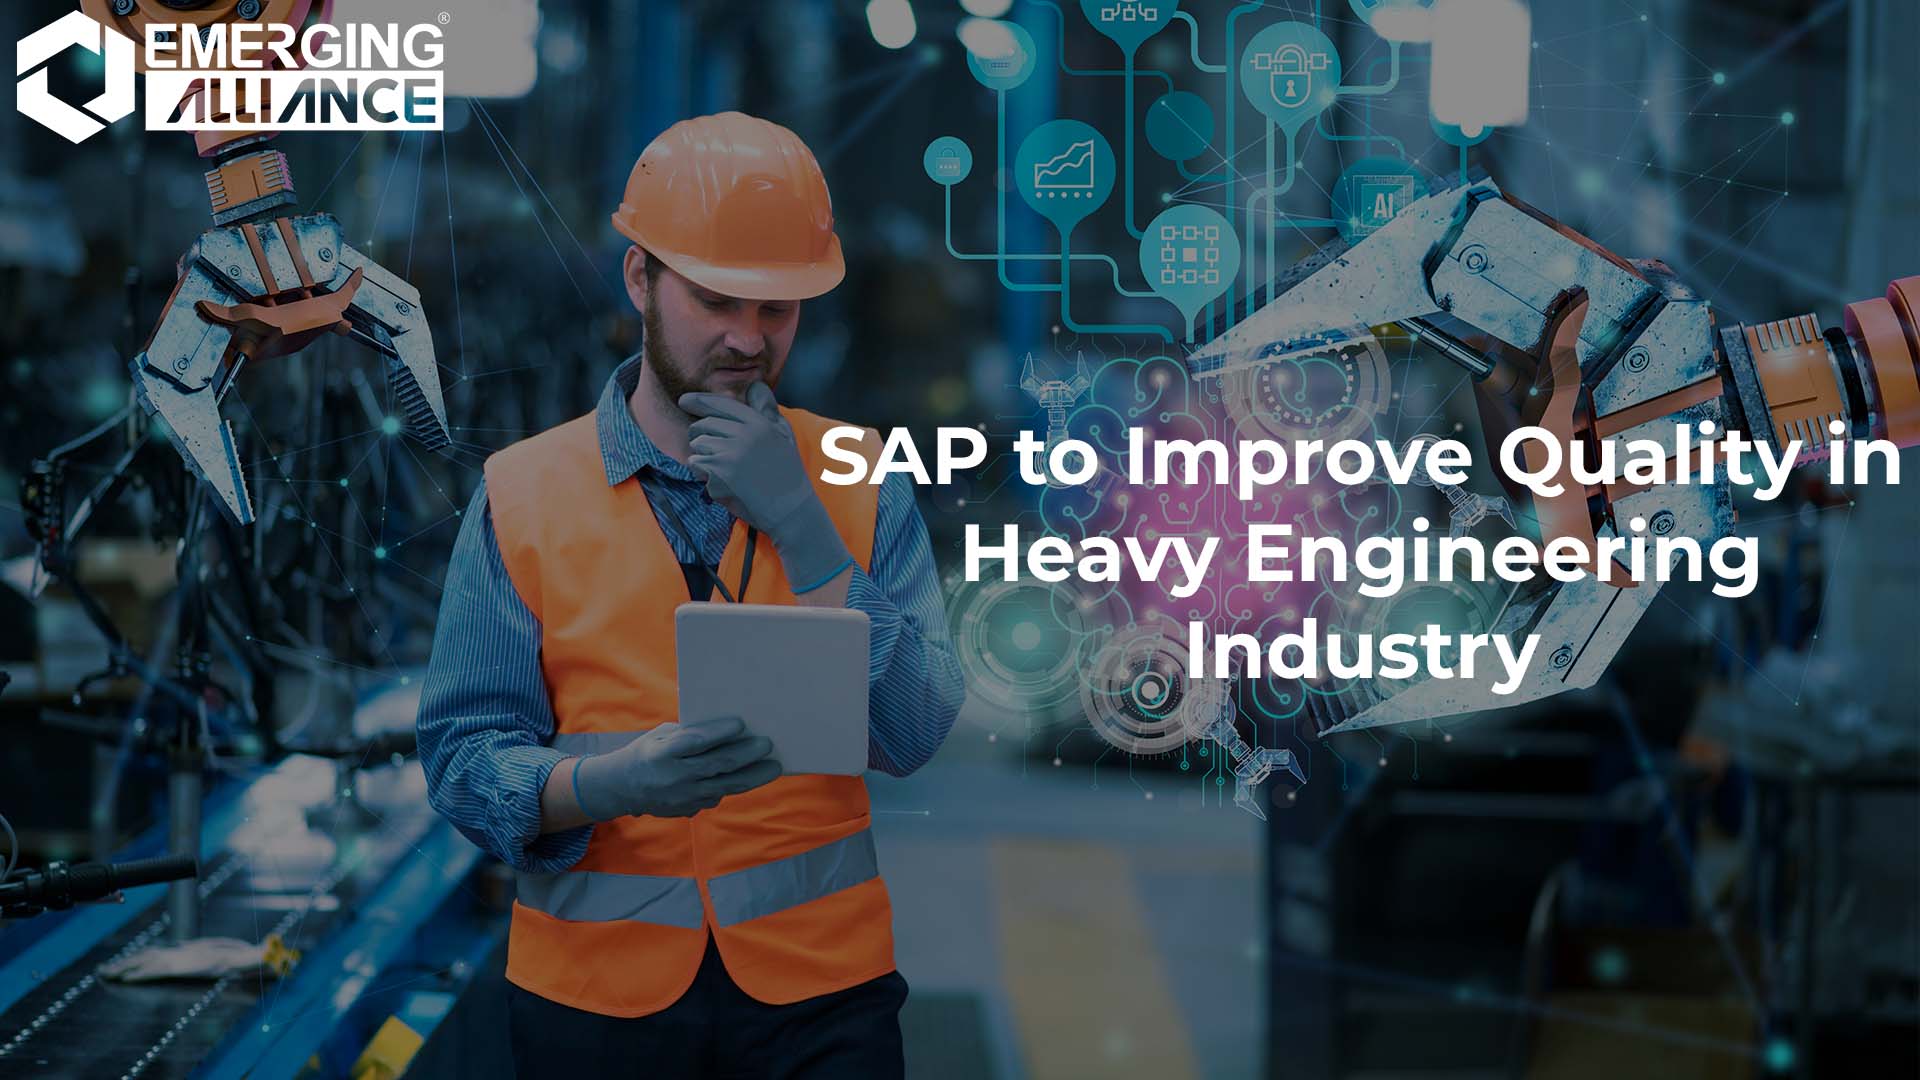 SAP for Heavy Engineering Industry